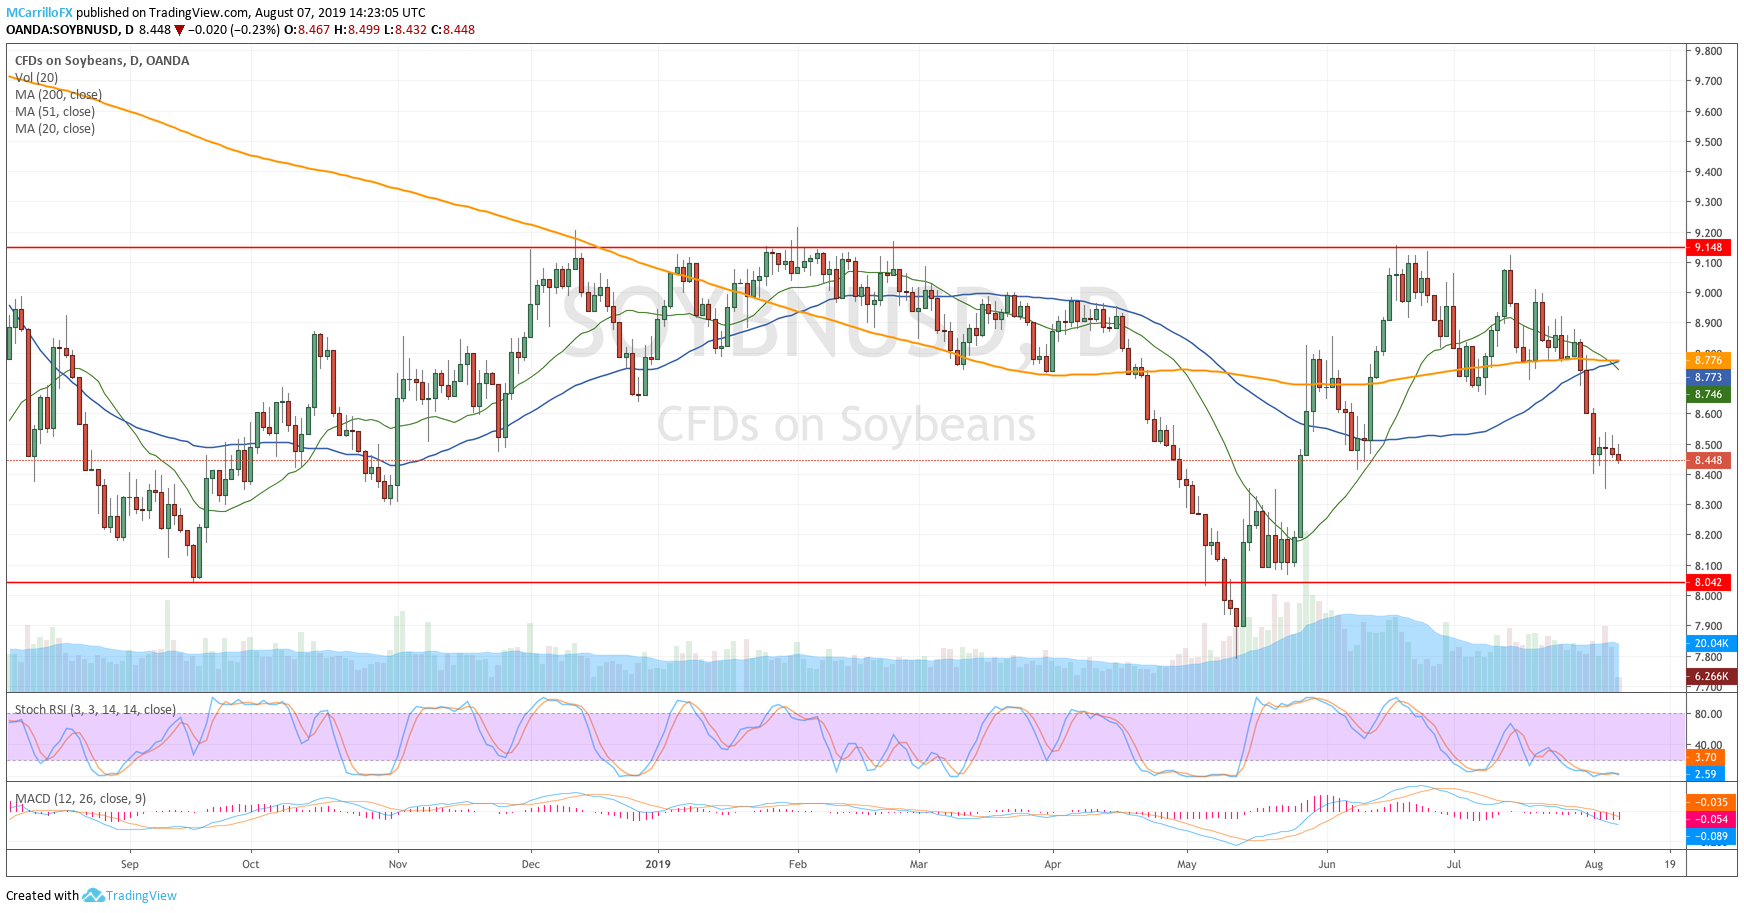 Price of Soybean daily chart August 7